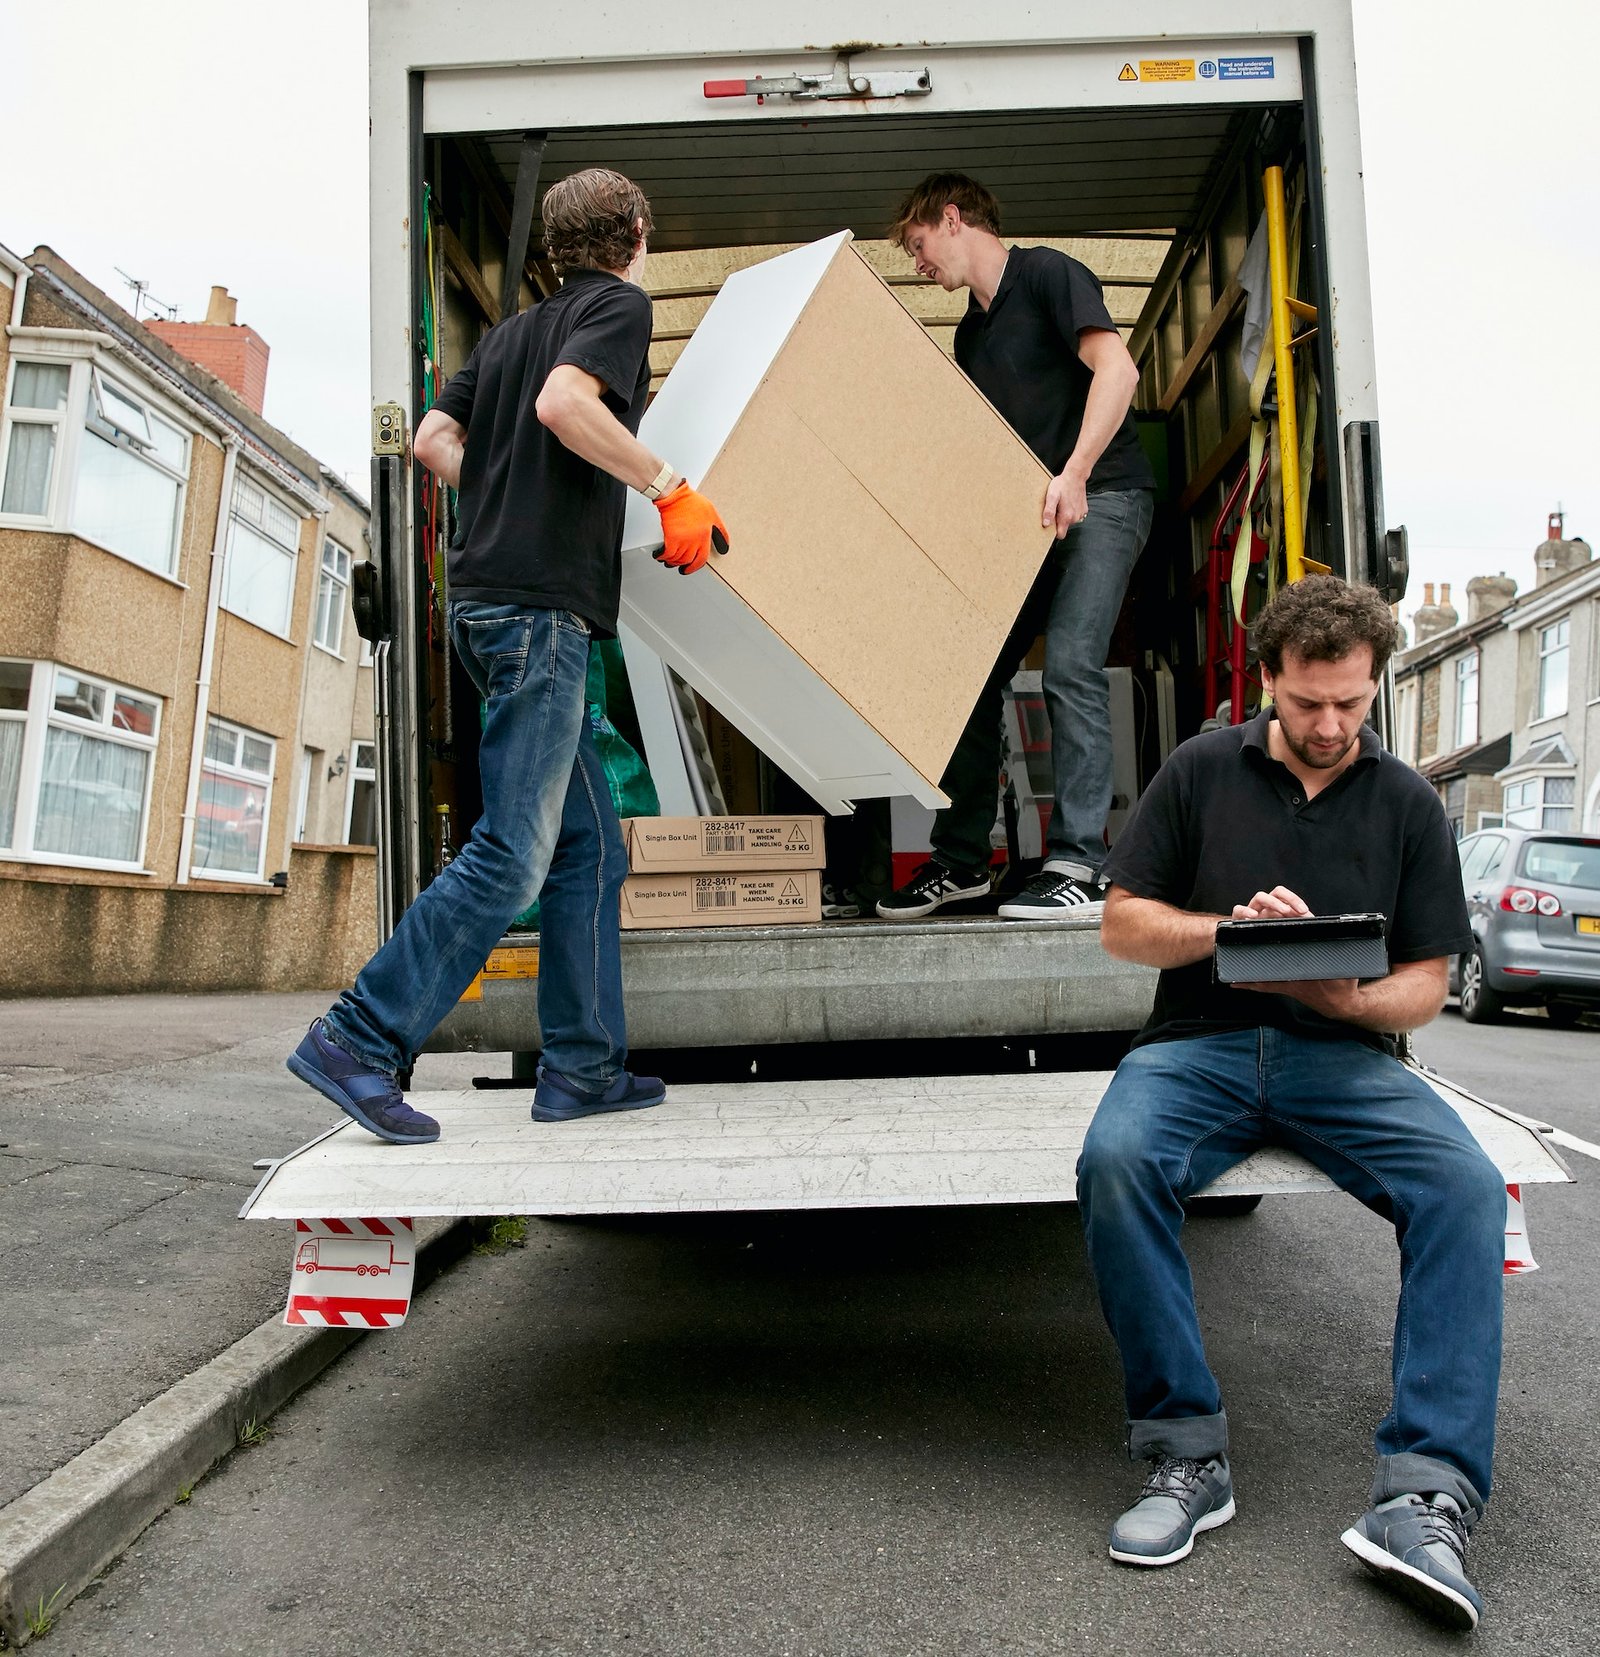 Removals business. A removals company, two men lifting furniture and one seated using a digital